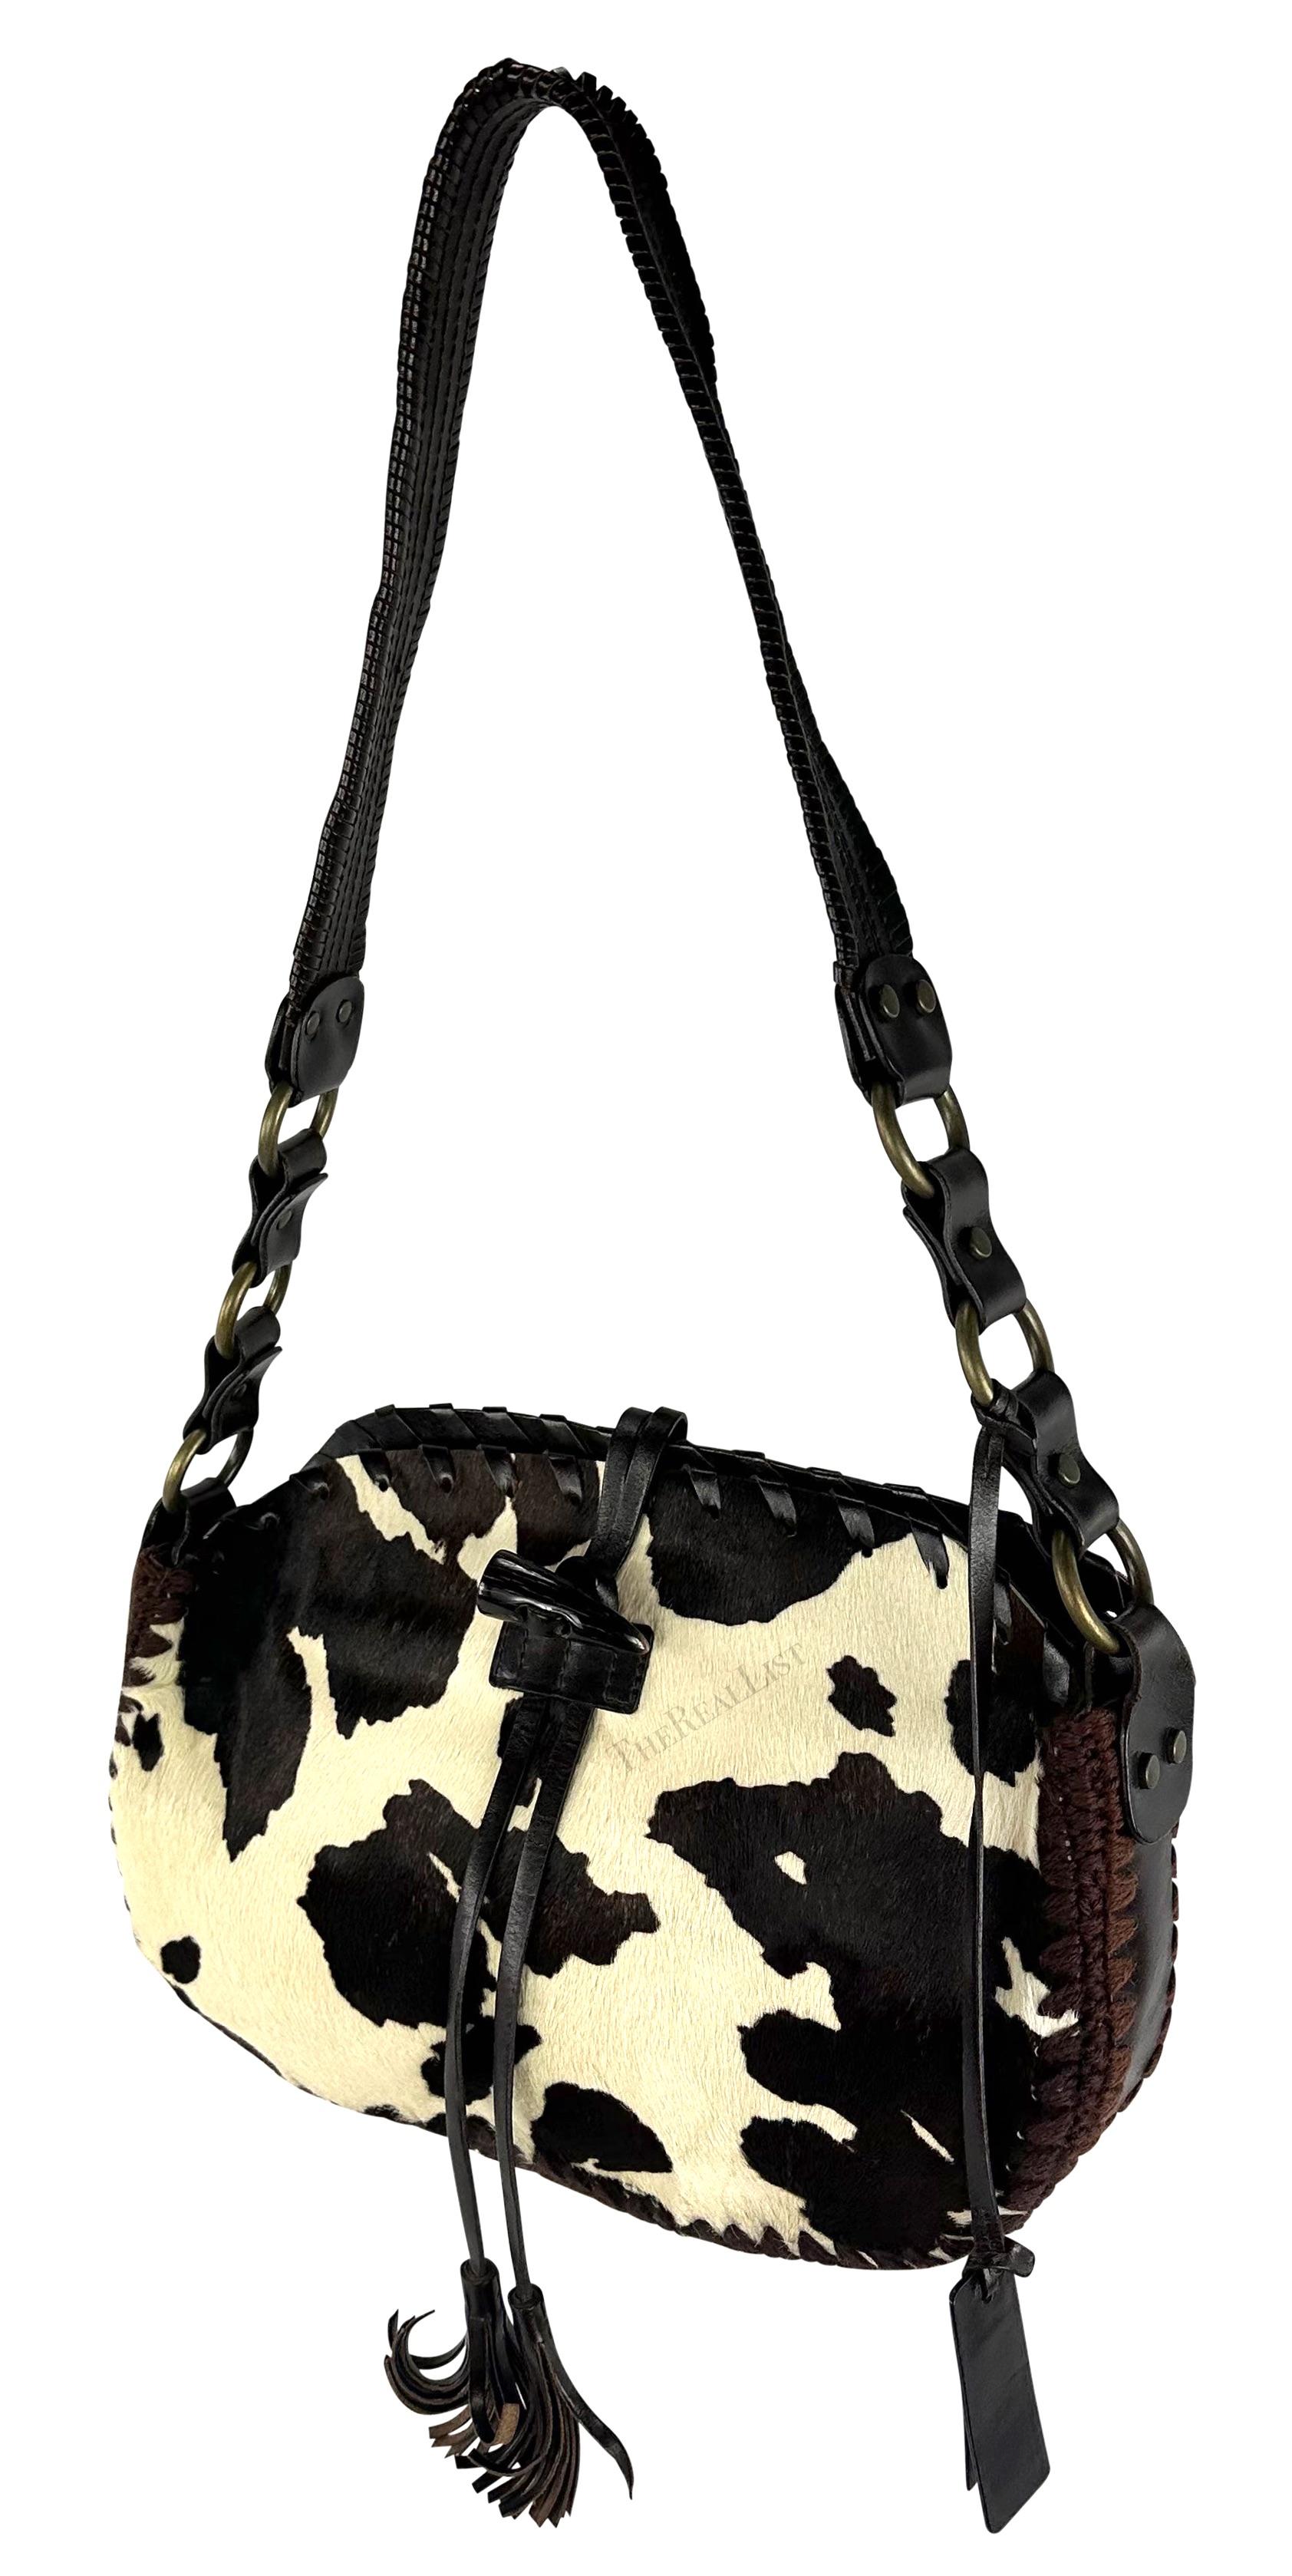 A cow print pony hair Dolce & Gabbana shoulder bag from the Fall/Winter 2002 collection. This chic small shoulder tote predominantly features cow print pony hair with dark brown leather accents. The bag features leather lace woven throughout, and